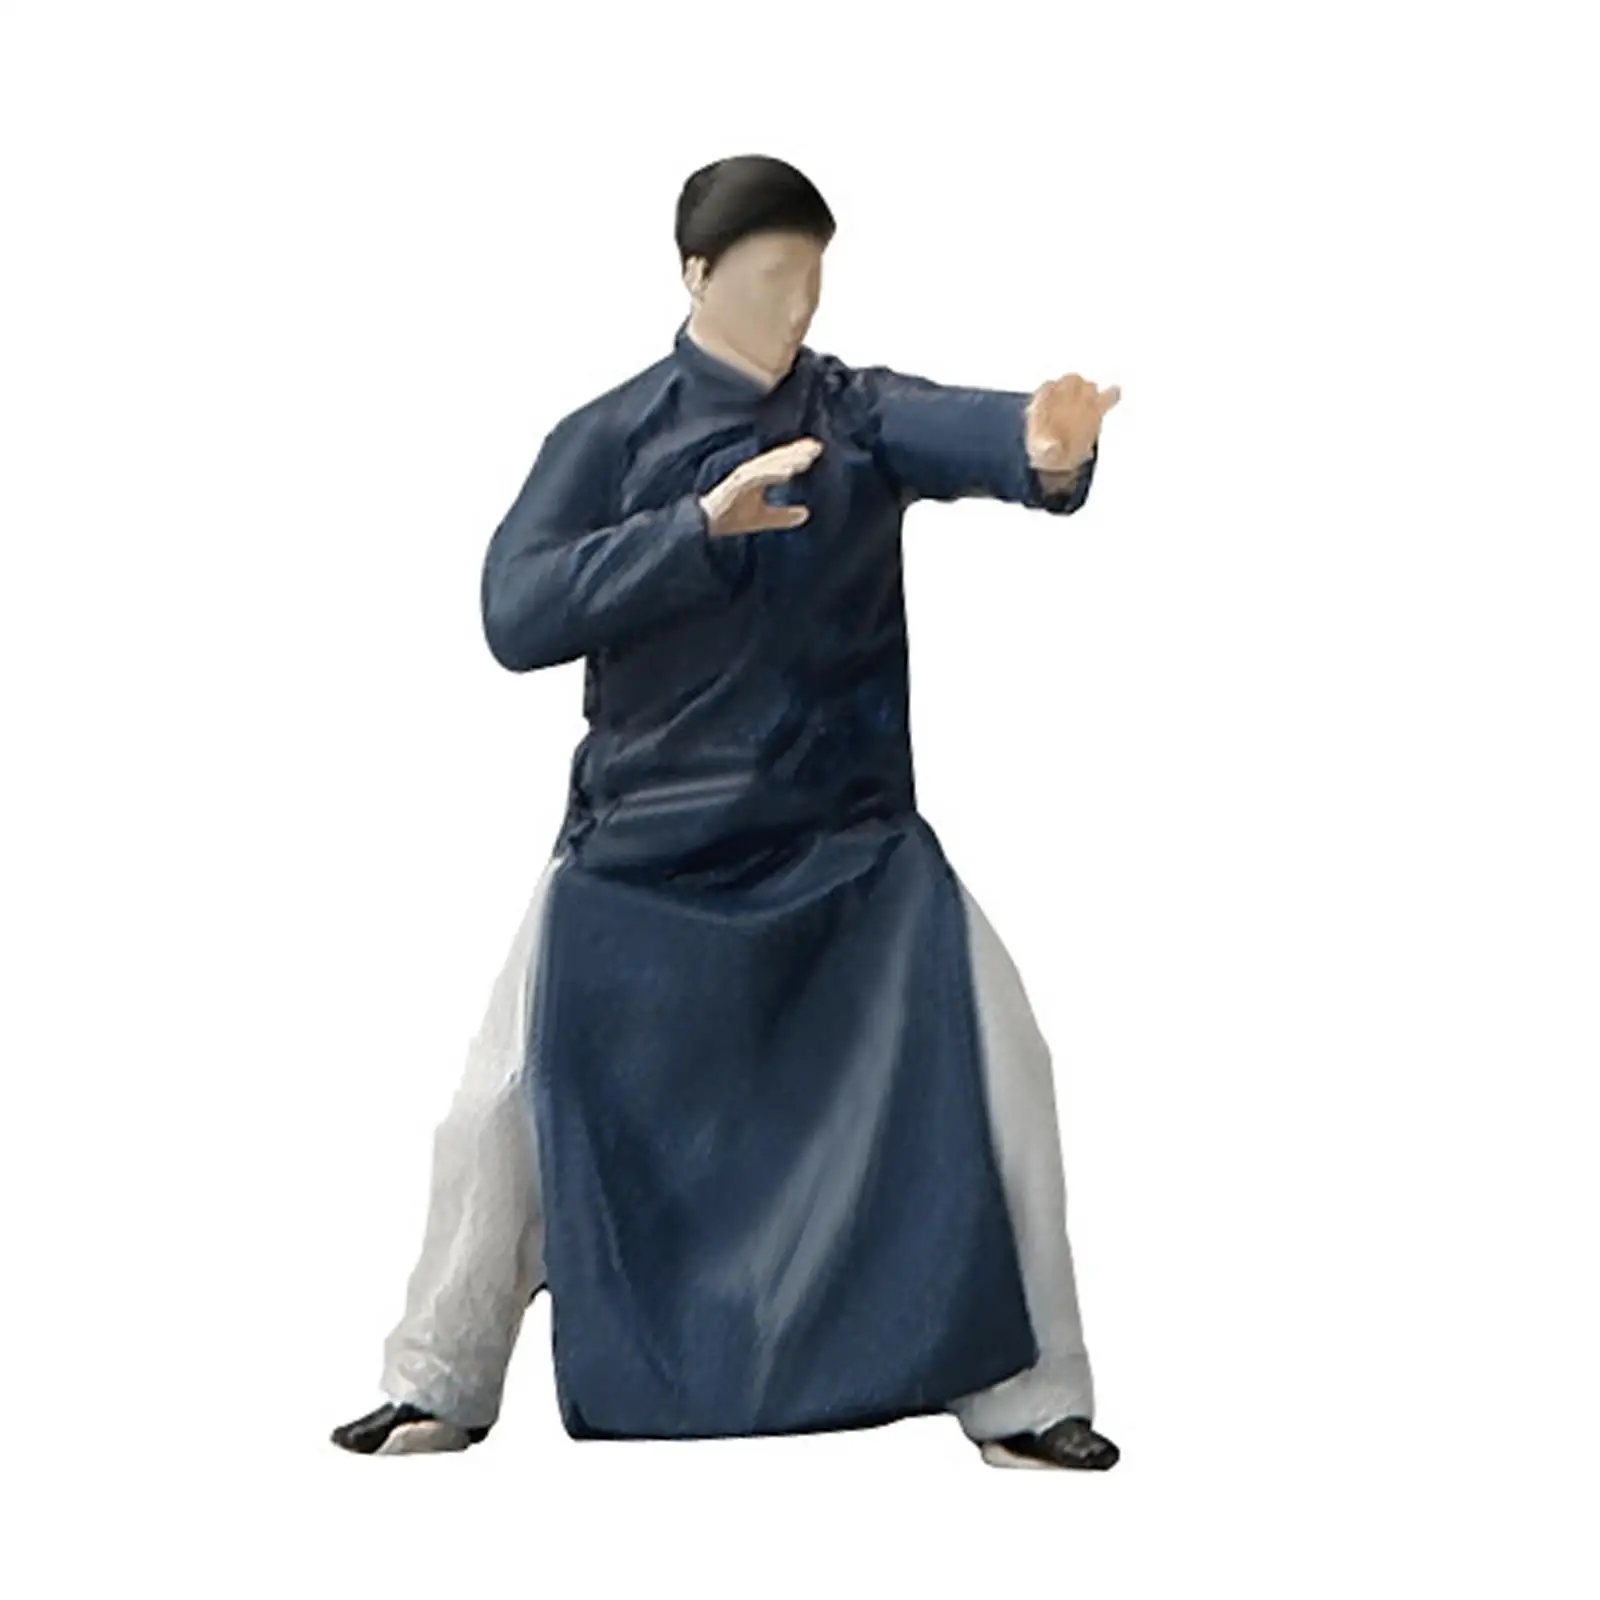 1/64 Scale Diorama Figure Painted Character Kungfu Figurine for Fariy Garden Collections Photo Props Model Trains Railway Sets